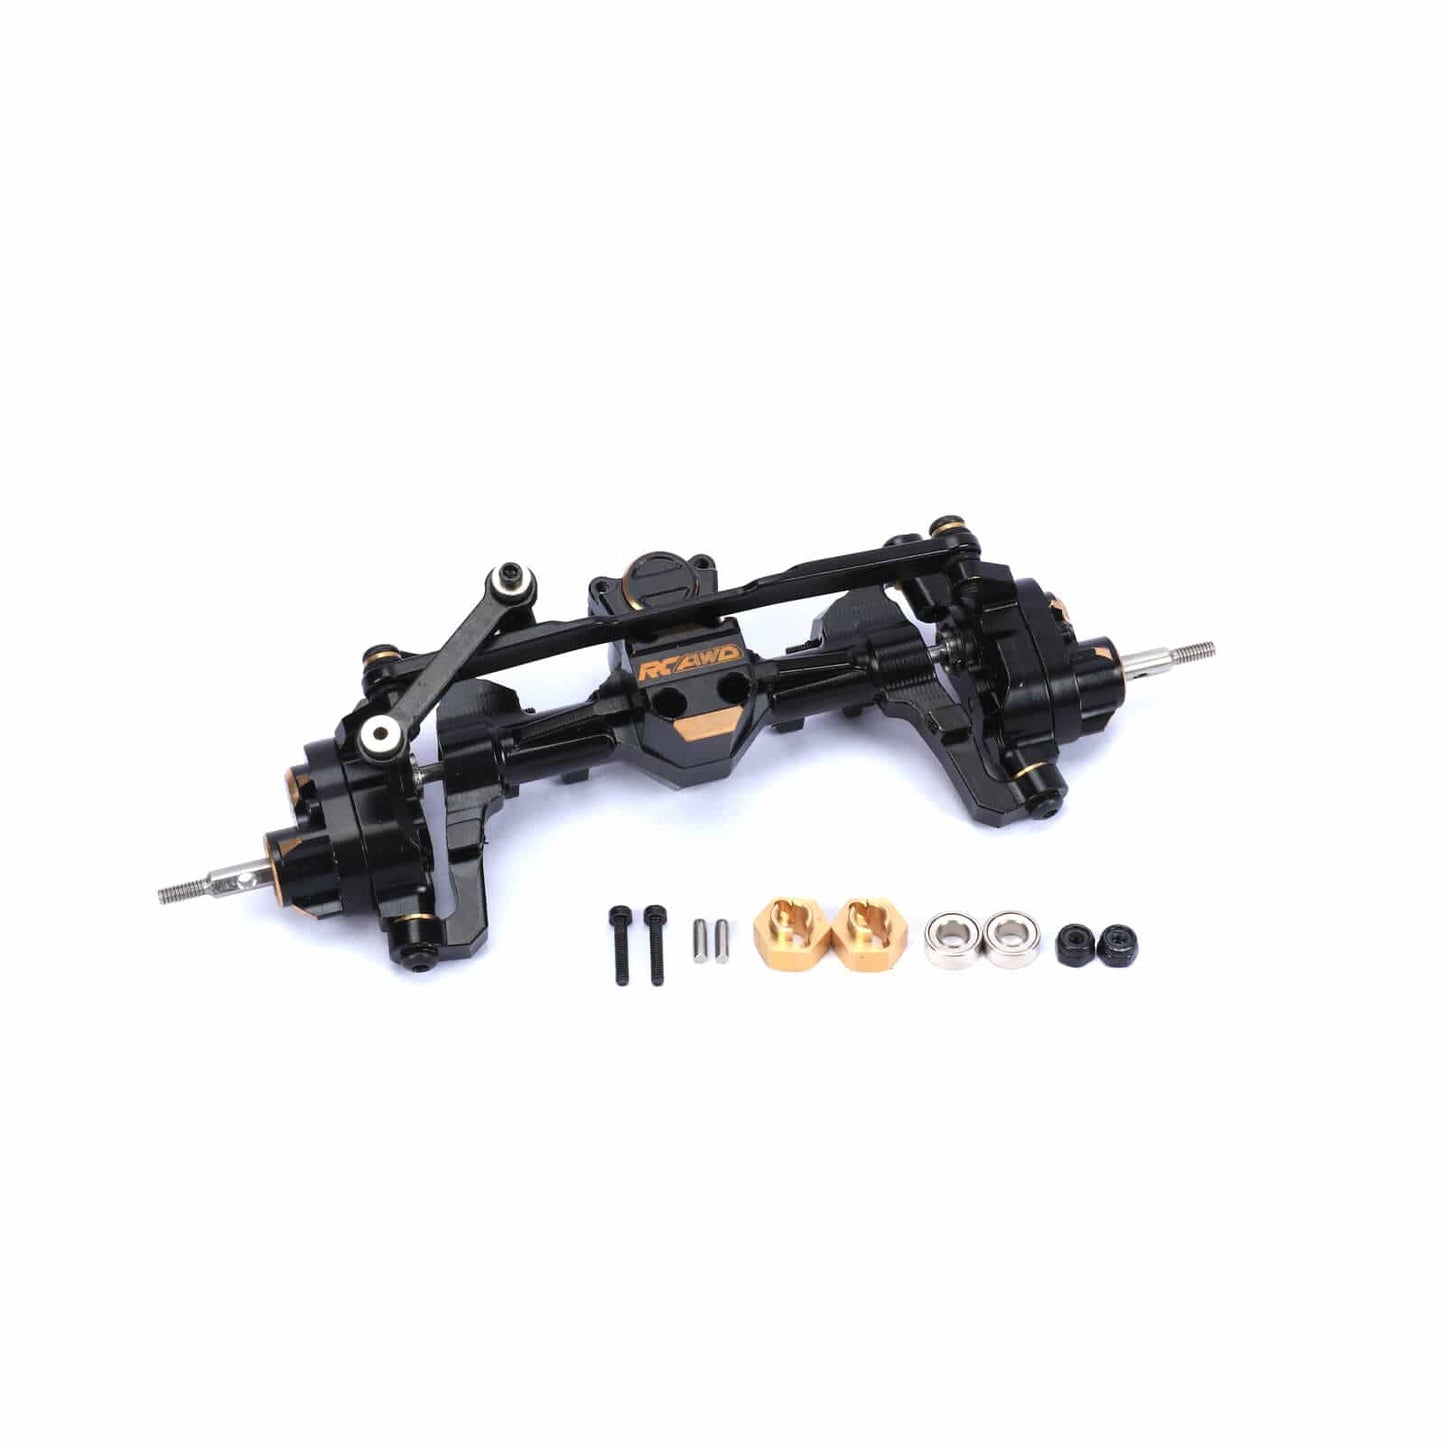 RCAWD AXIAL SCX24 RCAWD Axial SCX24 Upgrades Front Portal Axle +Front CVD Driveshaft Full set